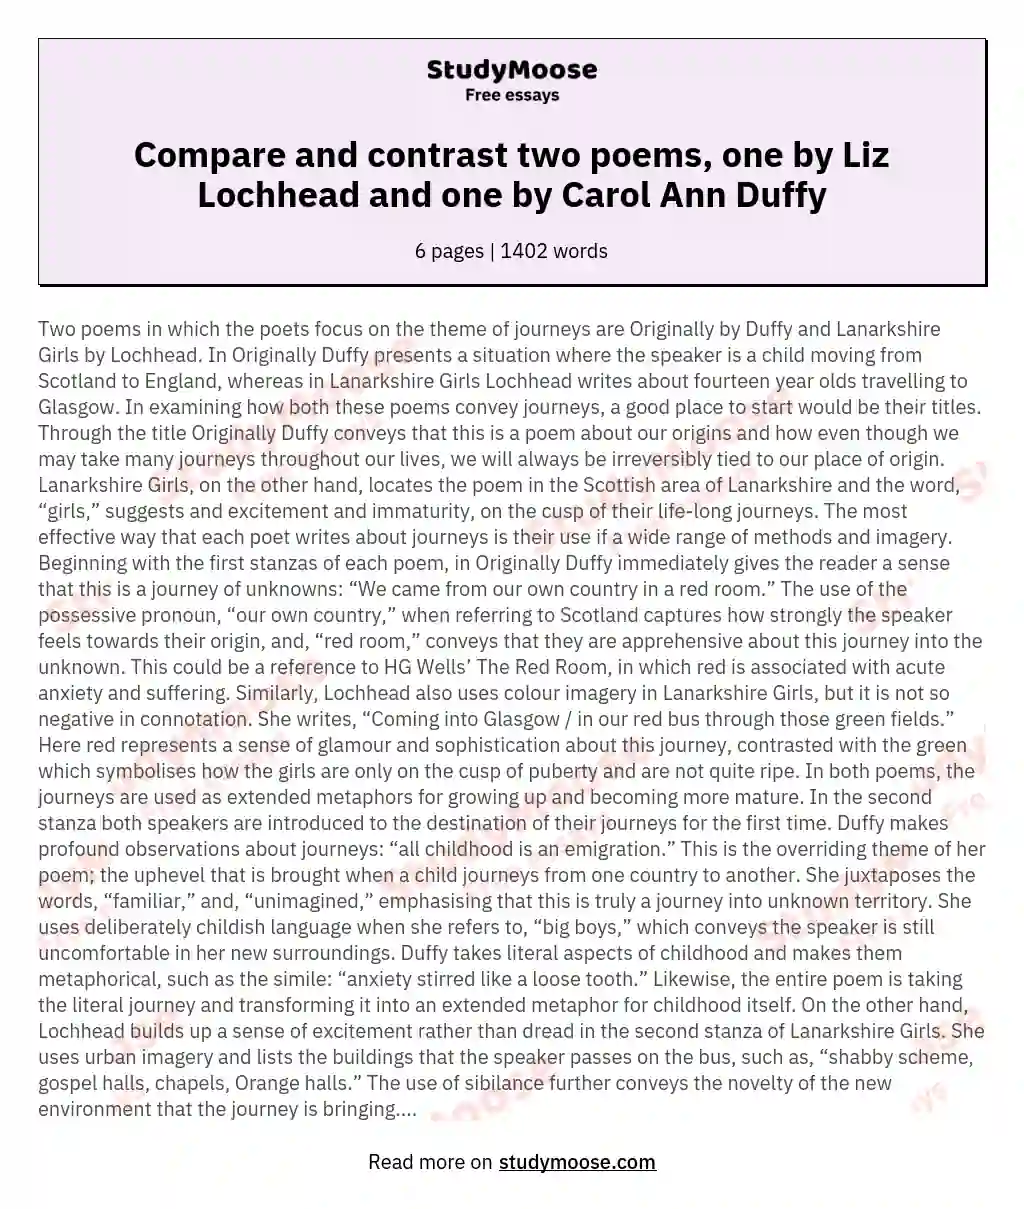 Compare and contrast two poems, one by Liz Lochhead and one by Carol Ann Duffy